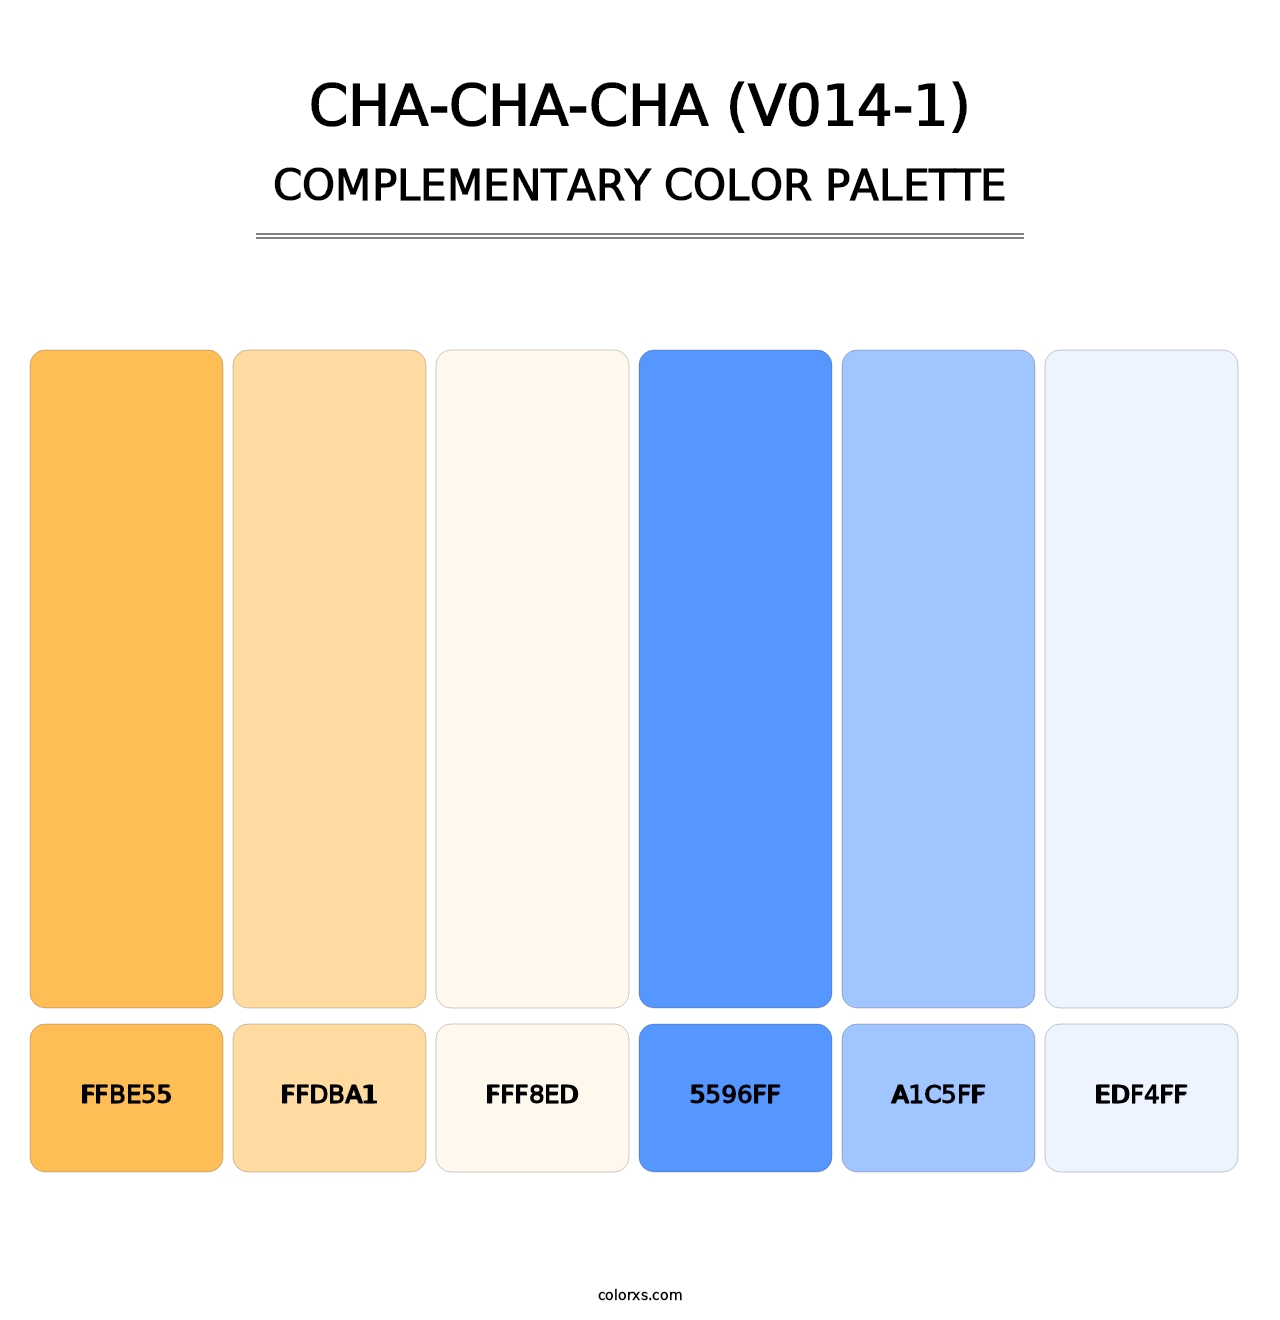 Cha-Cha-Cha (V014-1) - Complementary Color Palette